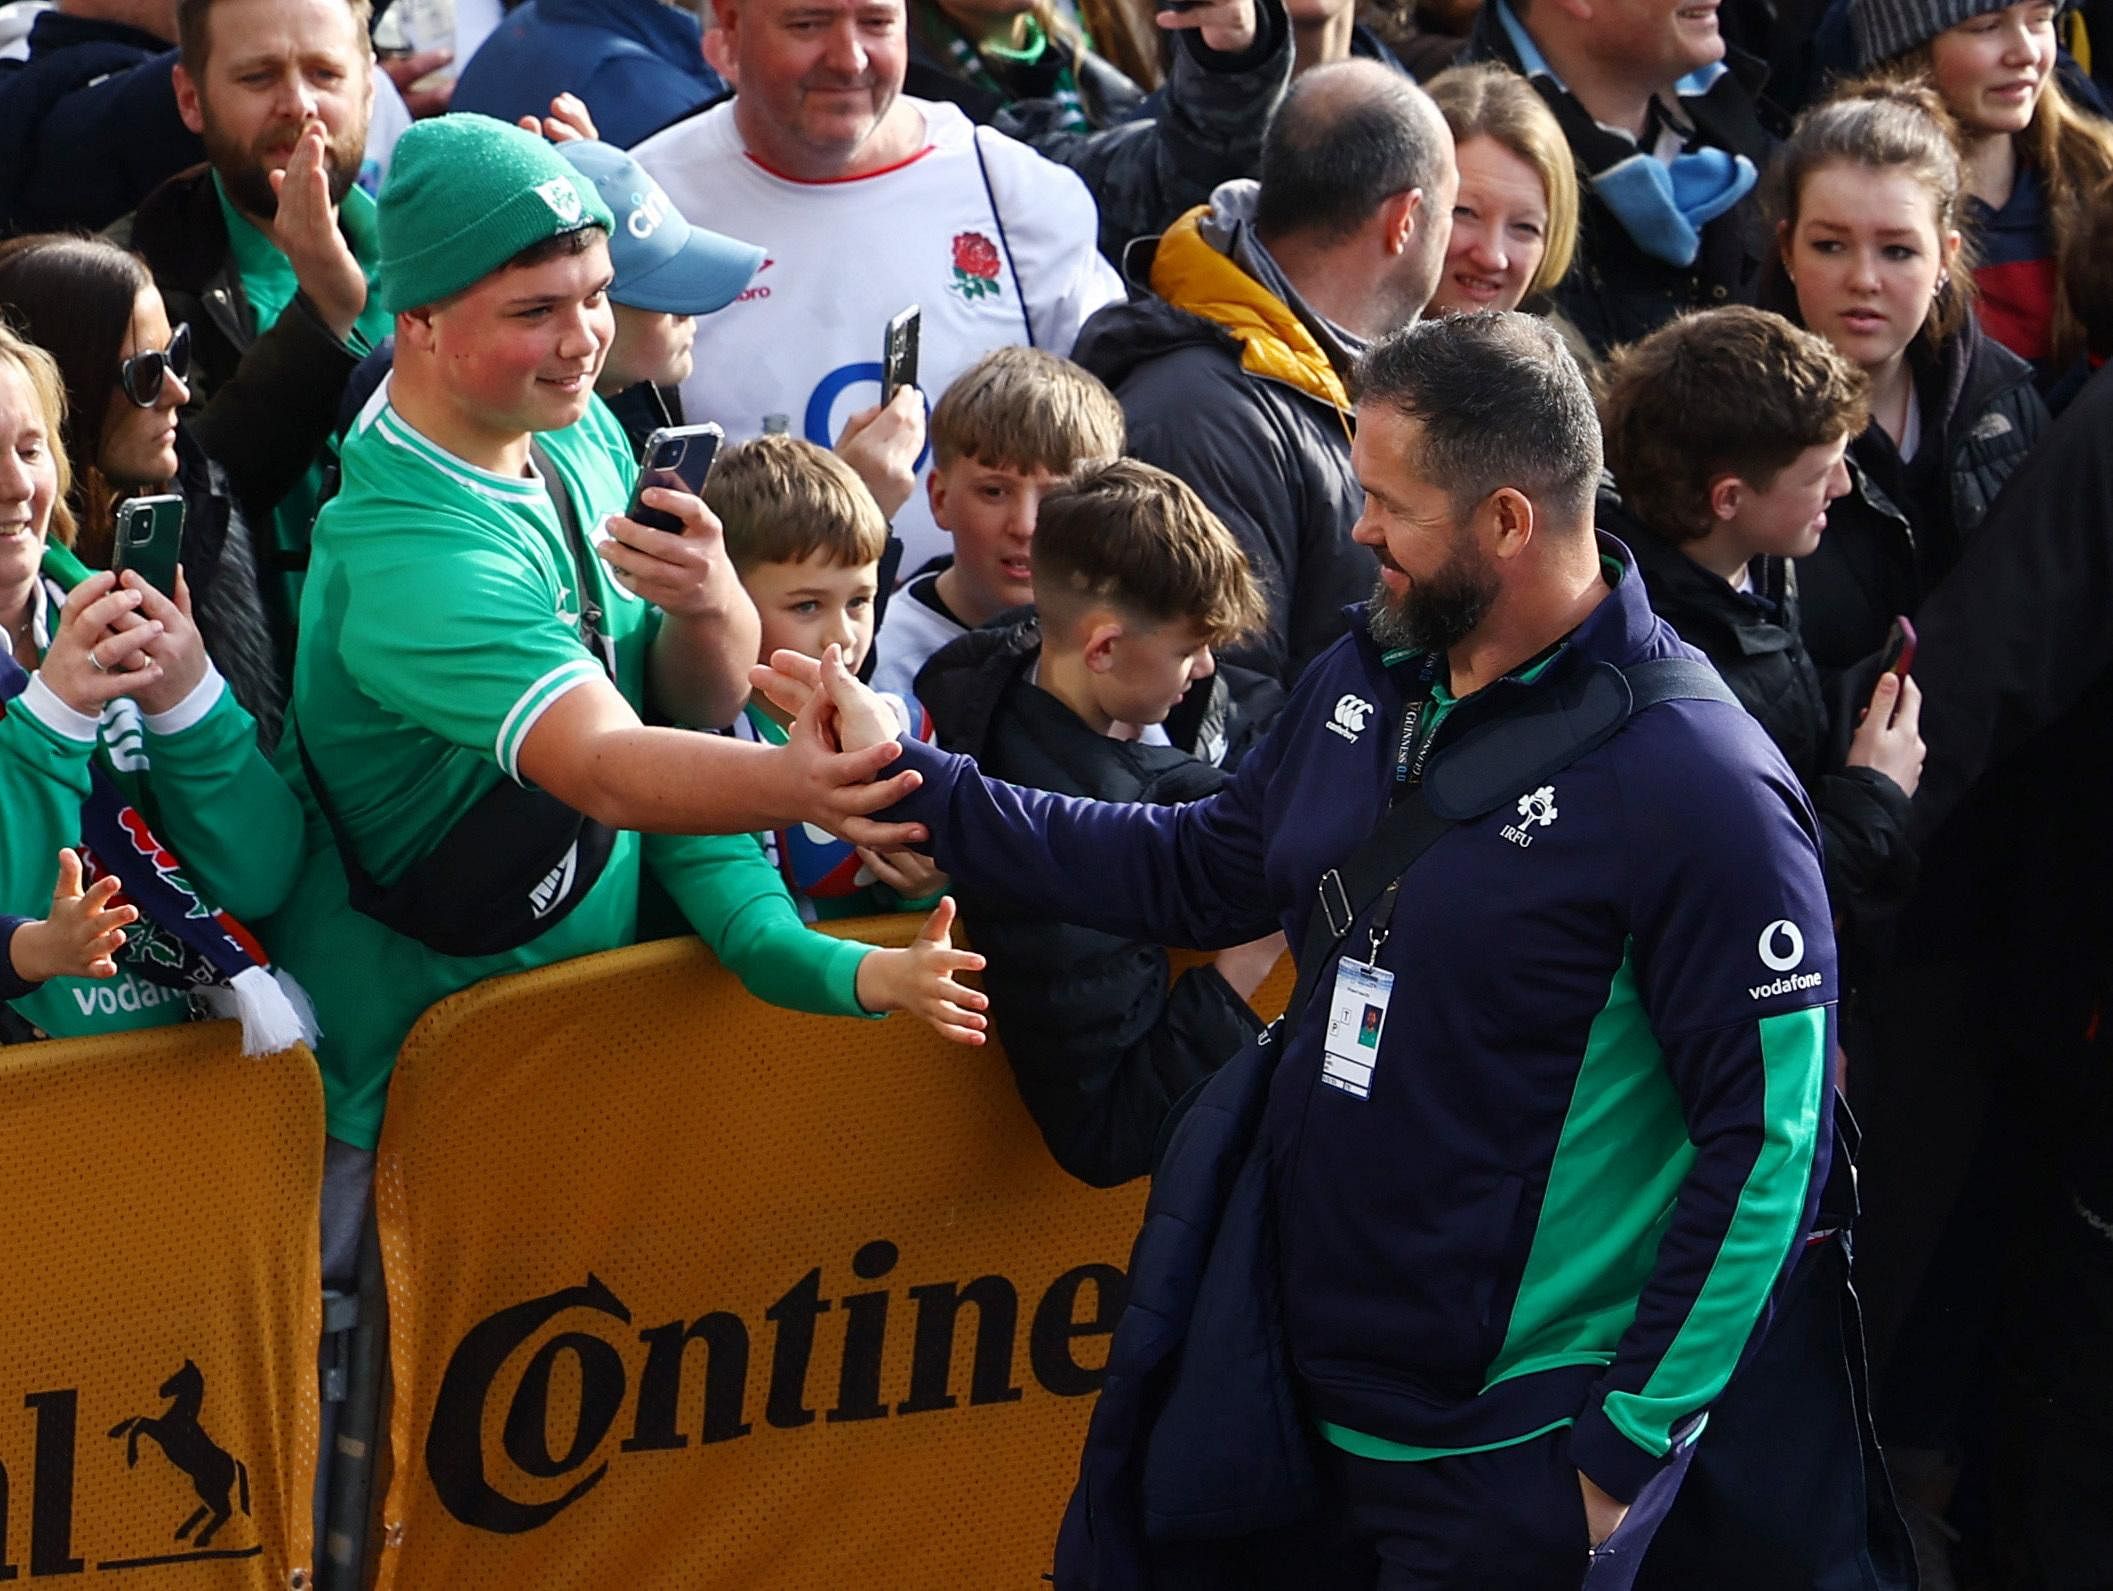 Andy Farrell’s humble style brings more glory for Irish rugby